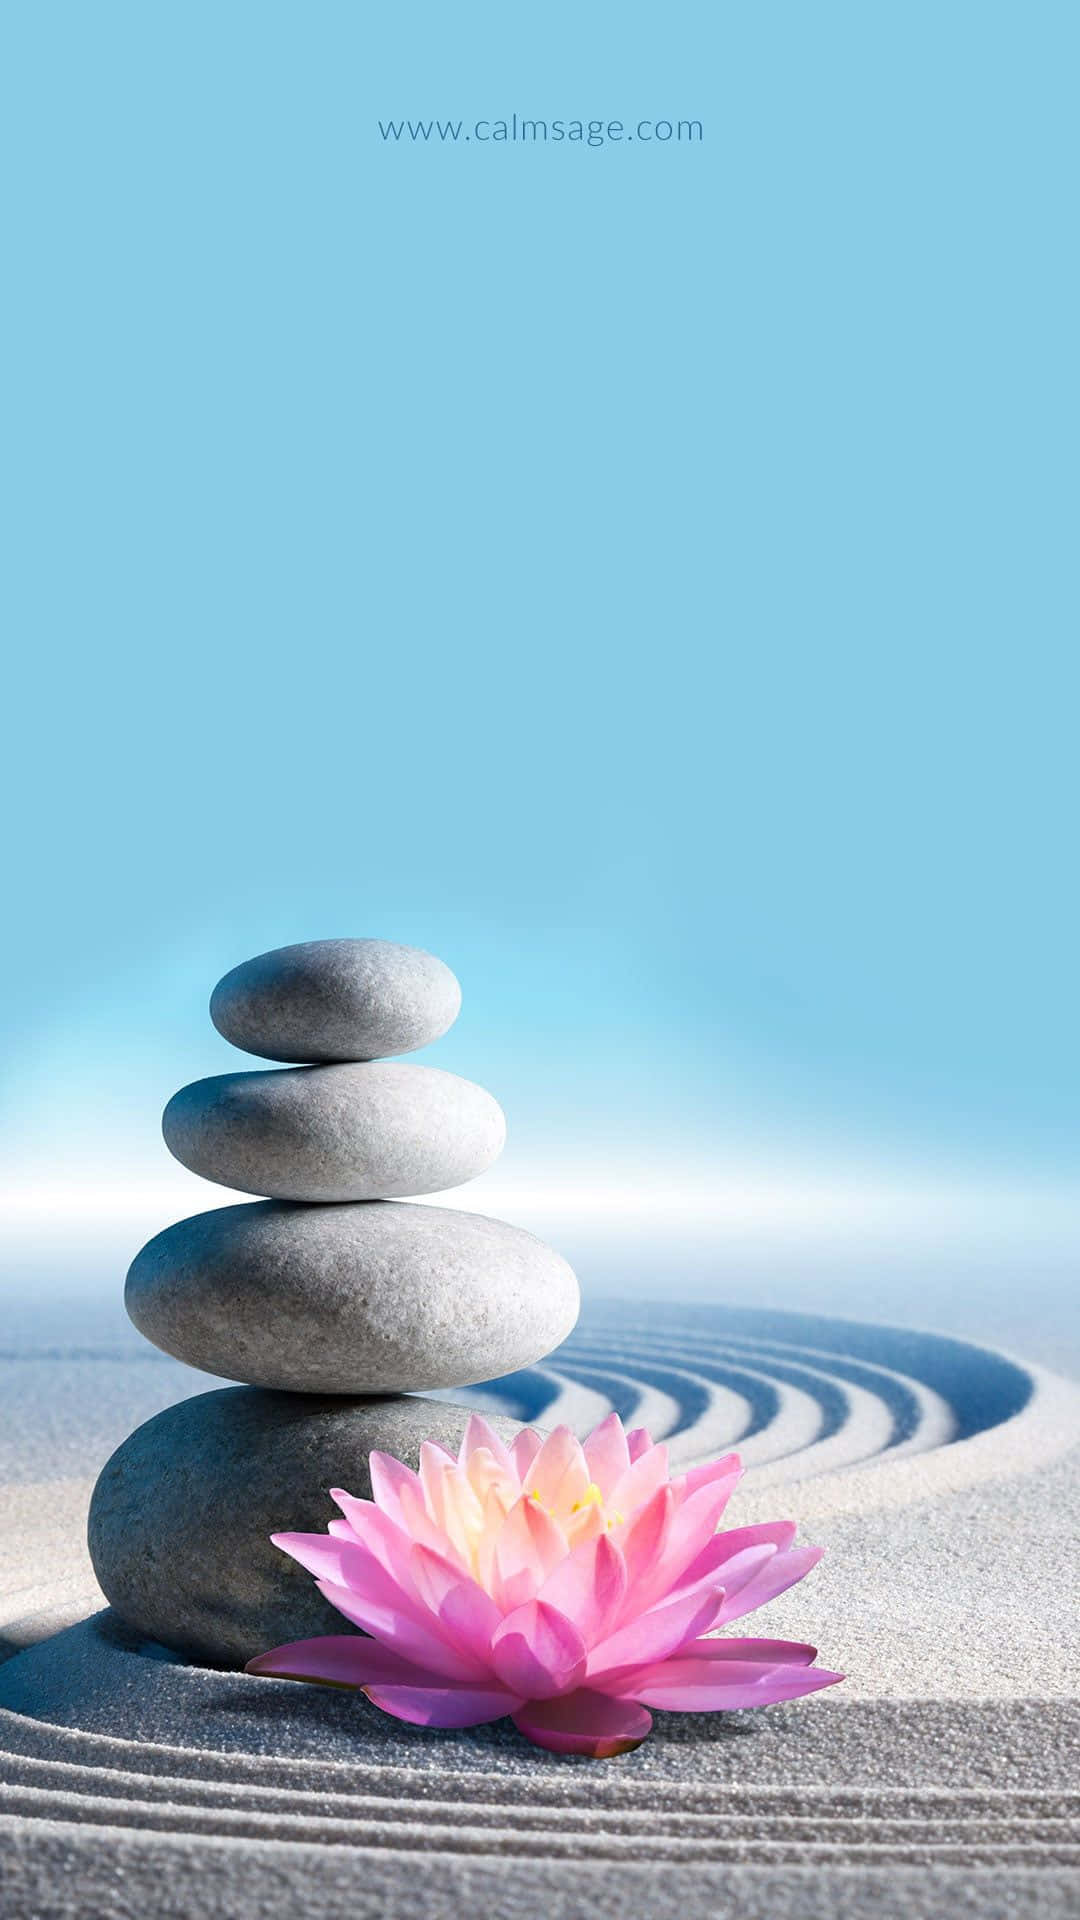 A Pink Lotus Flower On A Stack Of Stones Wallpaper